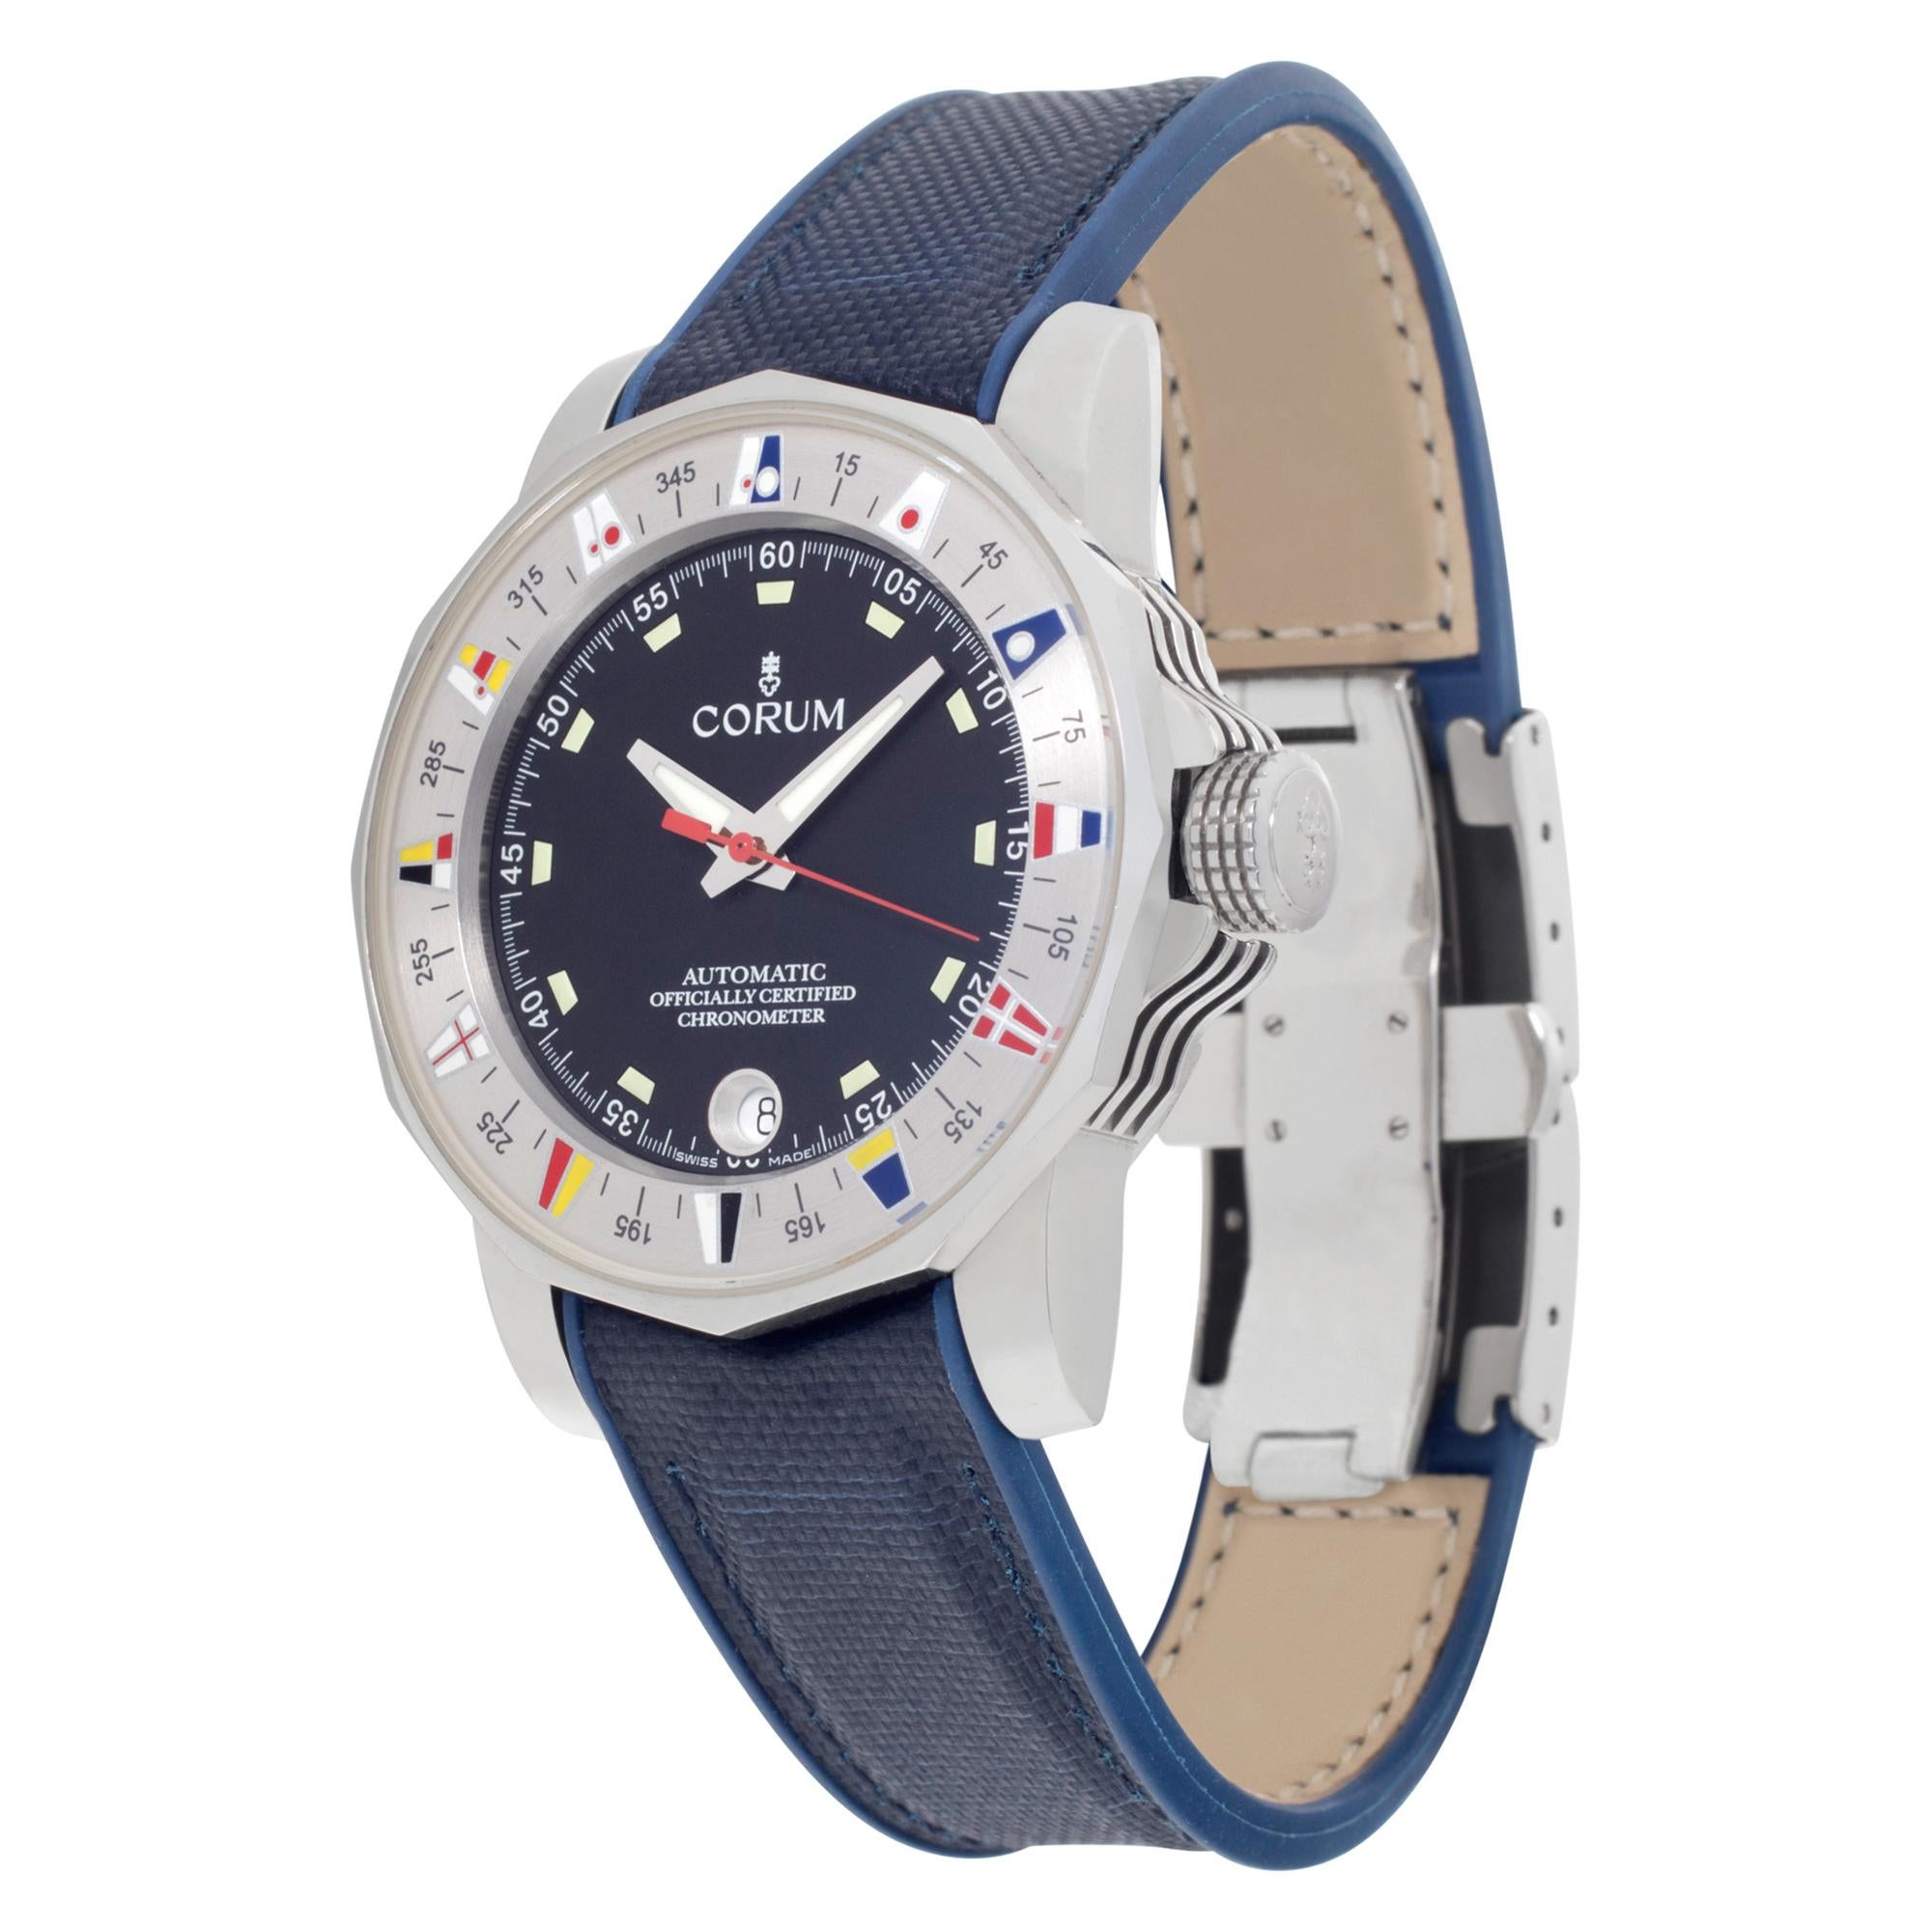 Corum Admirals Cup in stainless steel 38mm on a Corum navy blue leather strap with a stainless steel deployment buckle. Box and papers. Ref 982.530.20. Circa 2007. Fine Pre-owned Corum Watch.

Certified preowned Sport Corum Admirals Cup 982.530.20